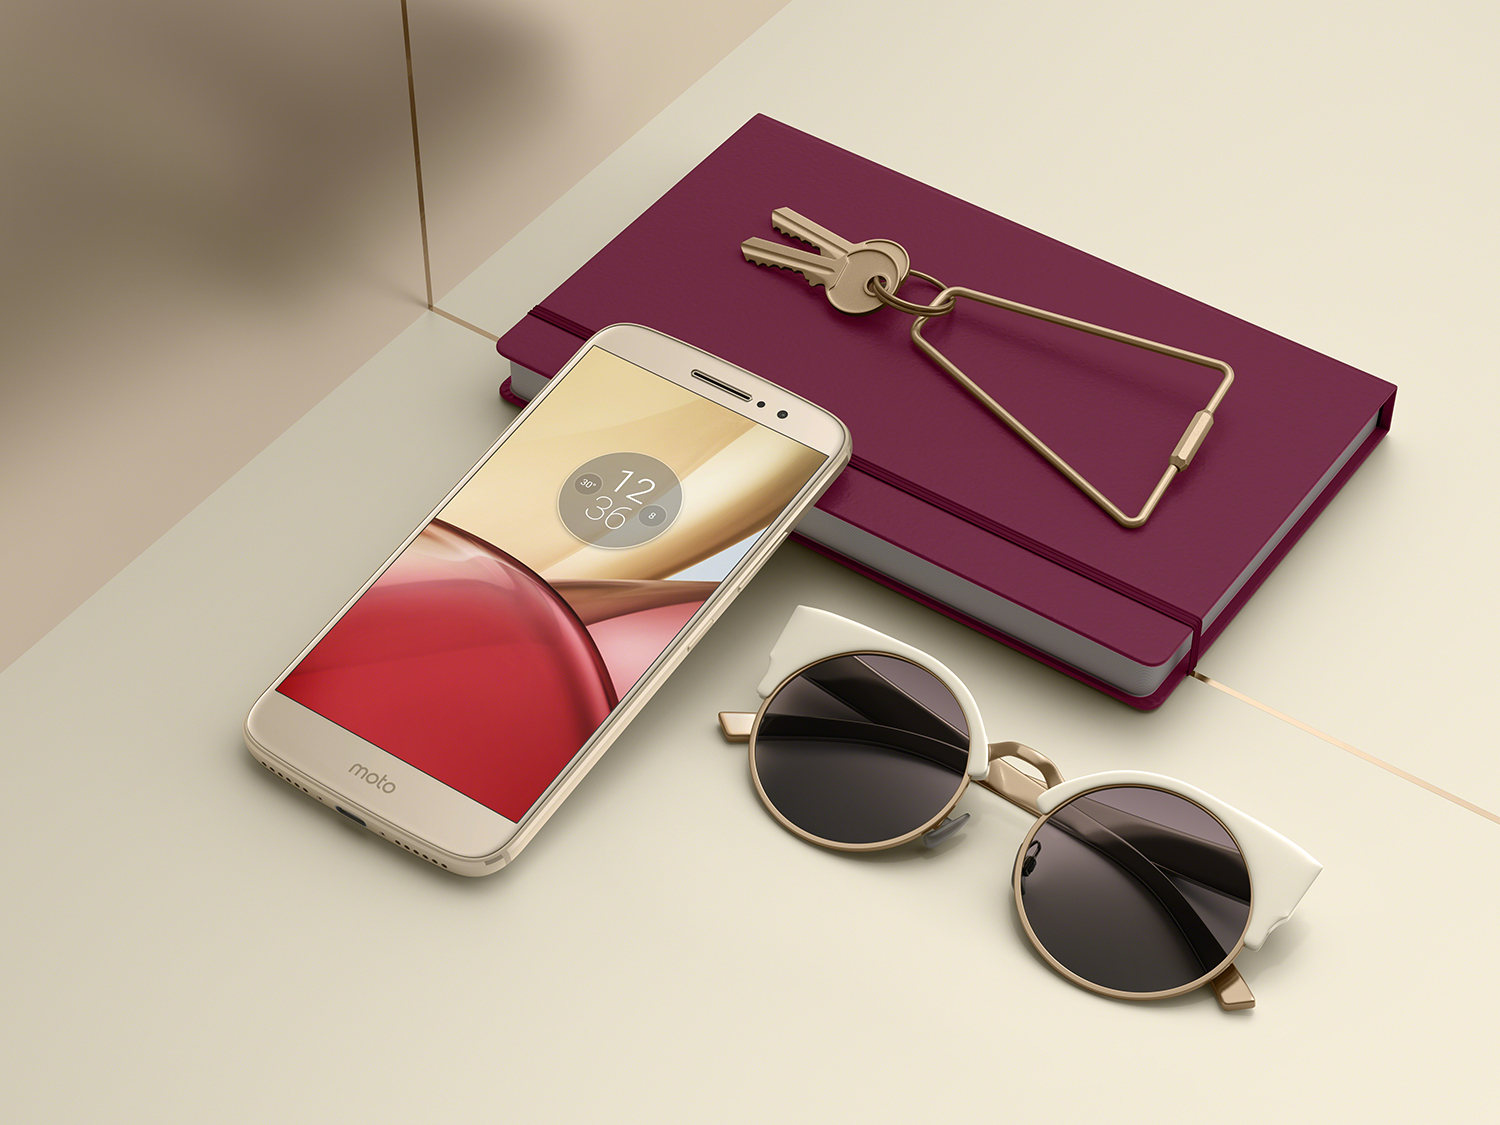 Moto M Now Available in Malaysia, Priced at RM1,199